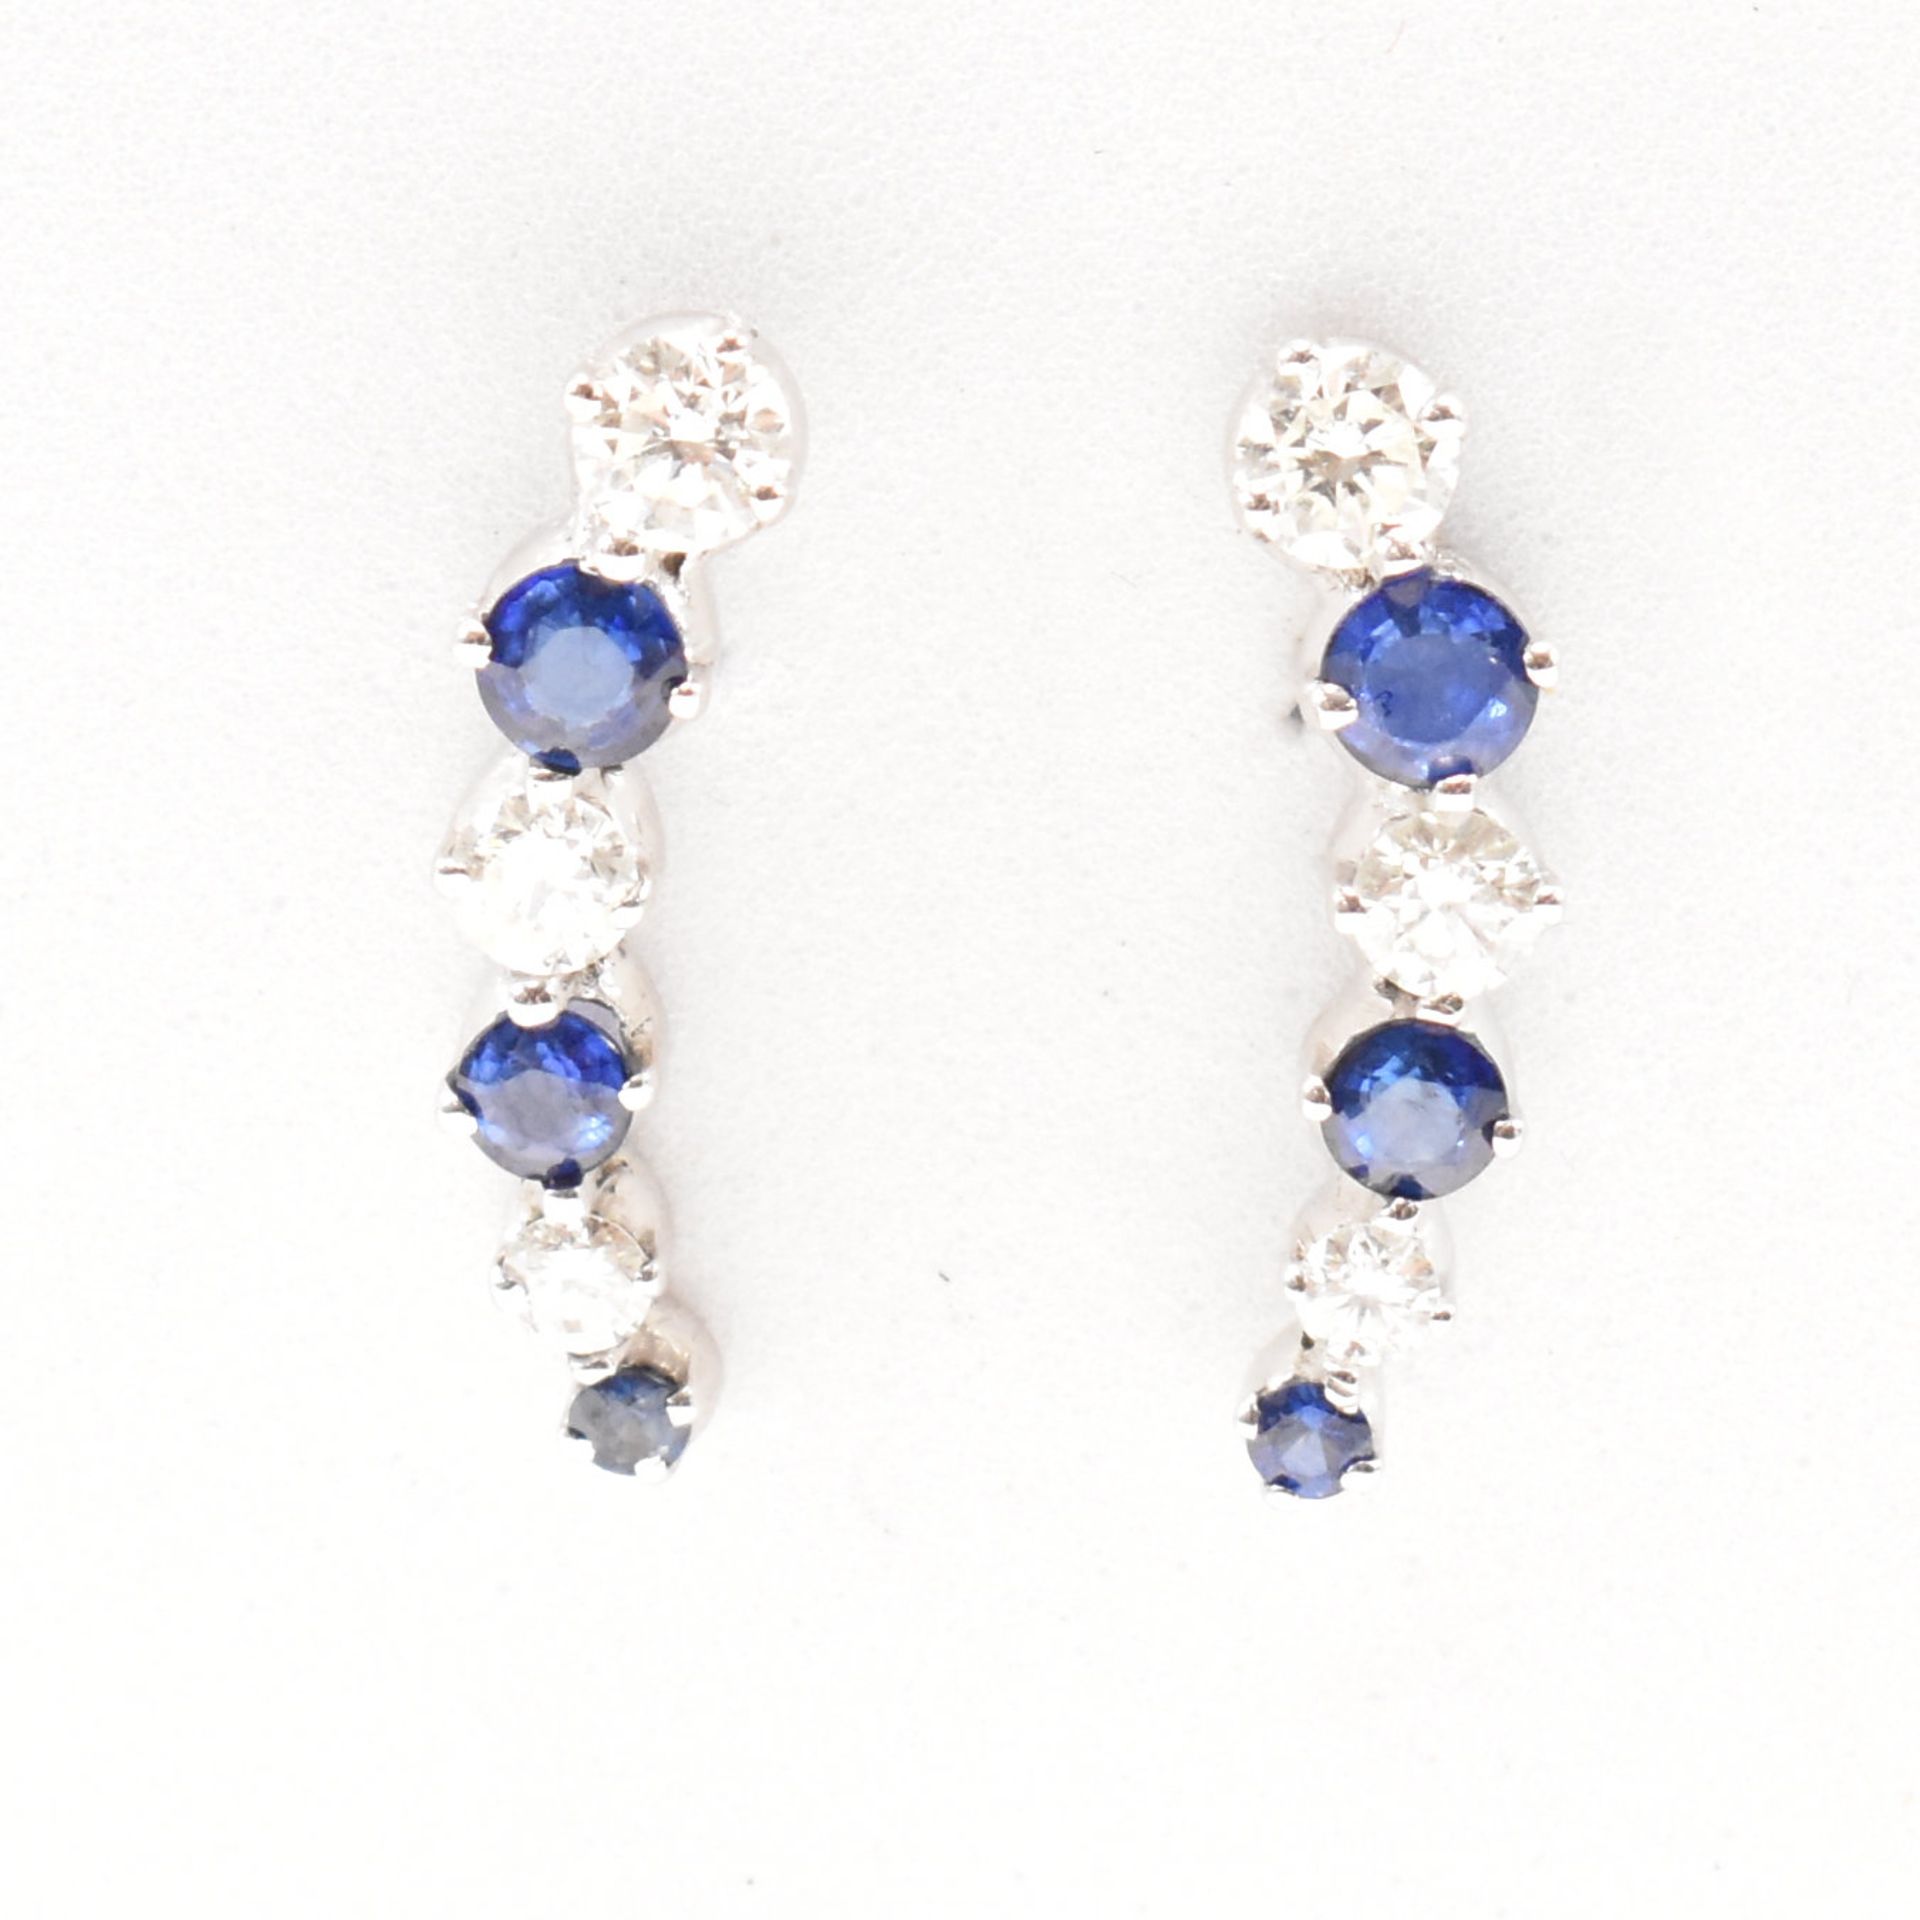 PAIR OF 14CT WHITE GOLD SAPPHIRE & DIAMOND EARRINGS - Image 3 of 8